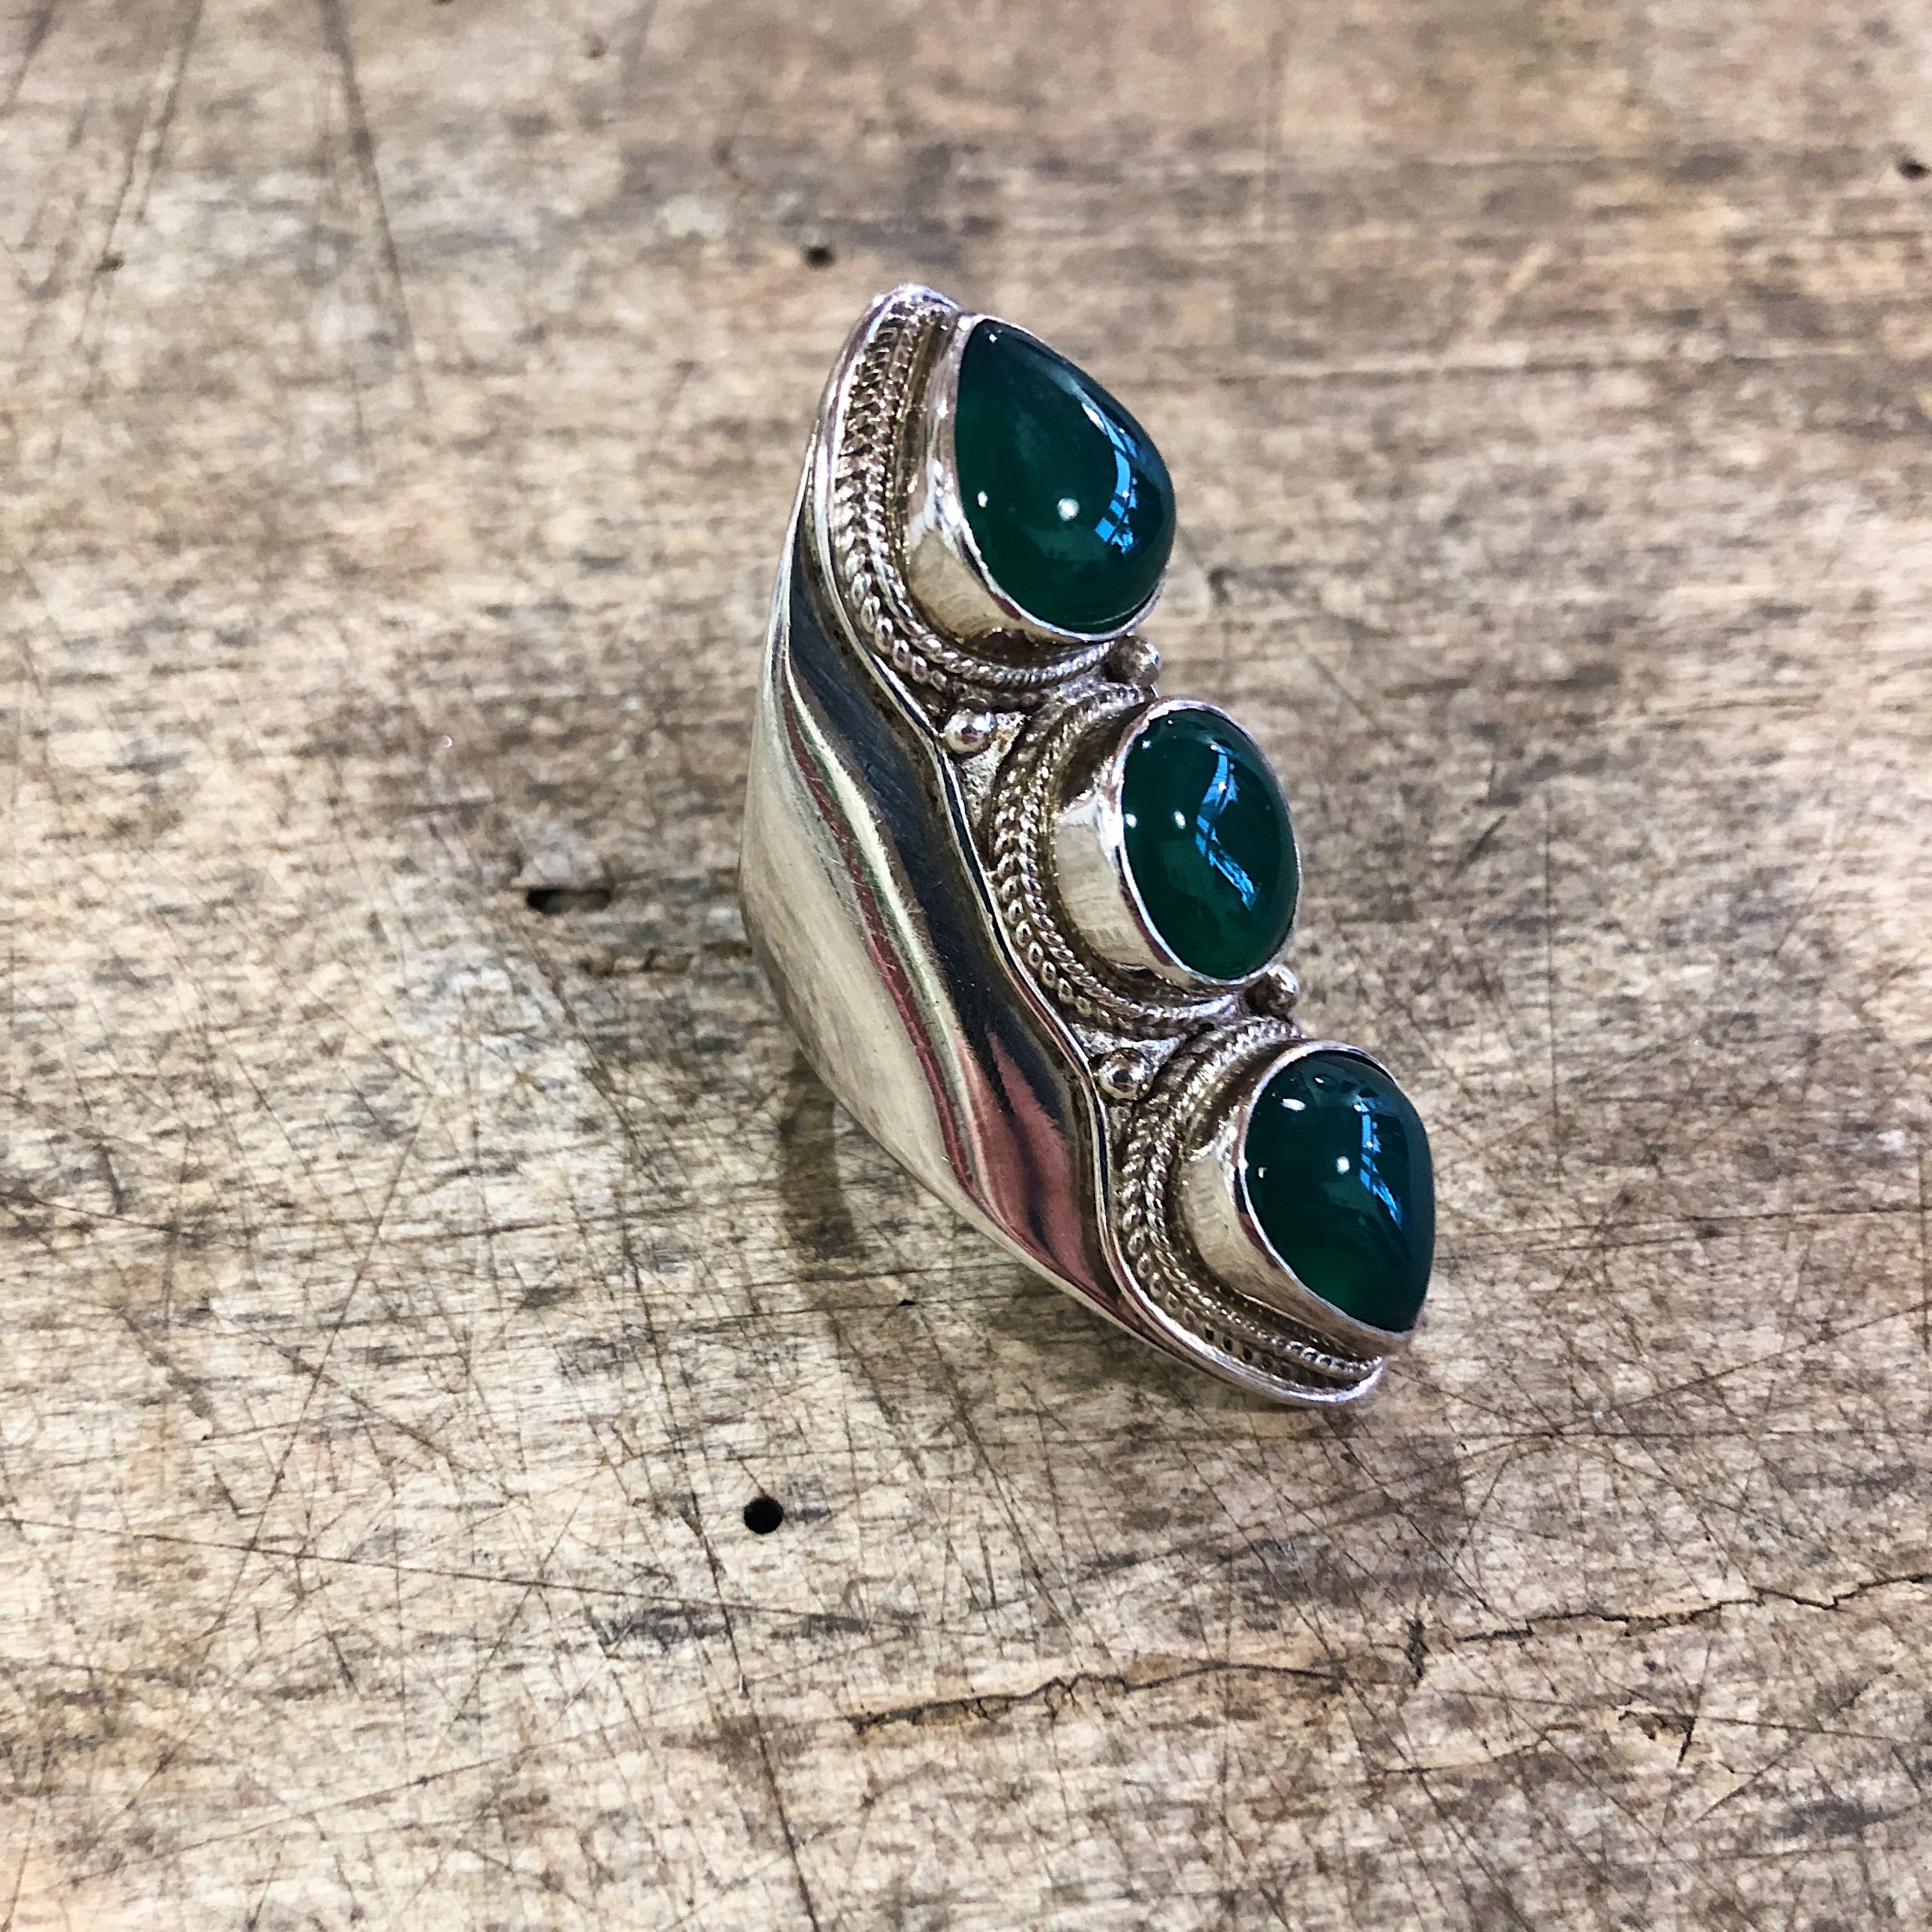 Kailas // Sterling Silver 3 Stone Green Onyx Ring